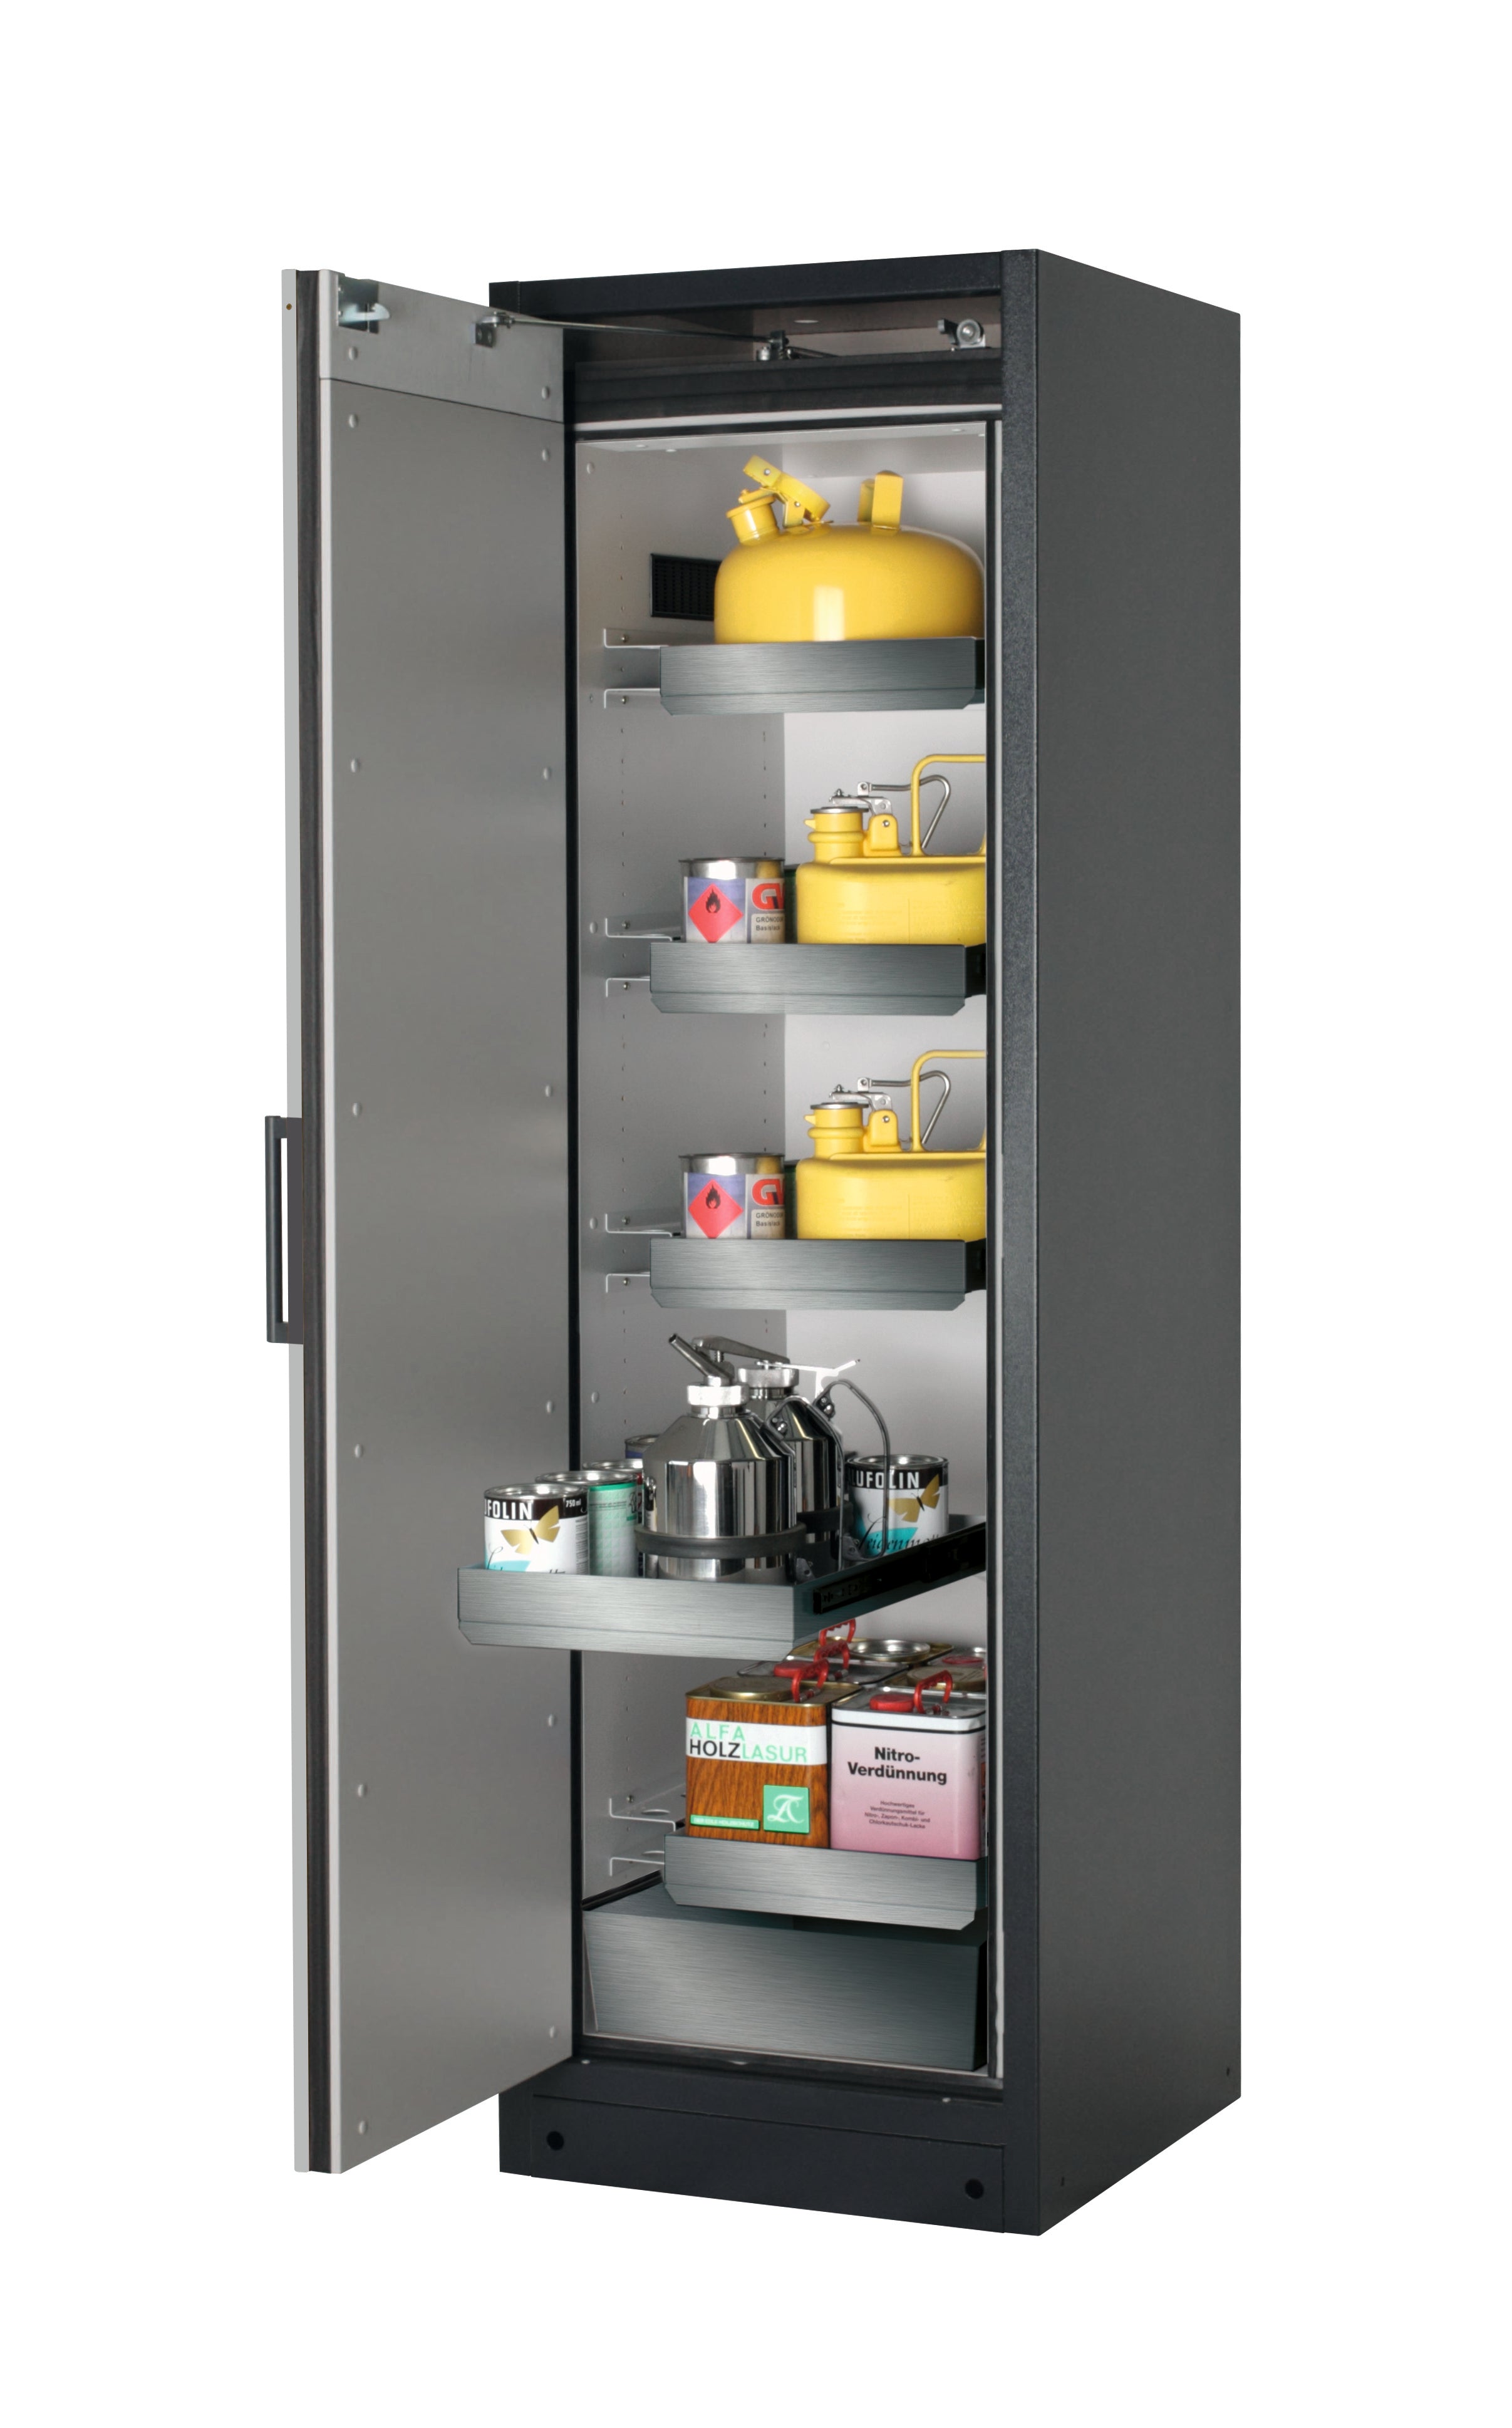 Type 90 safety storage cabinet Q-PEGASUS-90 model Q90.195.060.WDAC in pure white RAL 9010 with 4x drawer (standard) (stainless steel 1.4301),